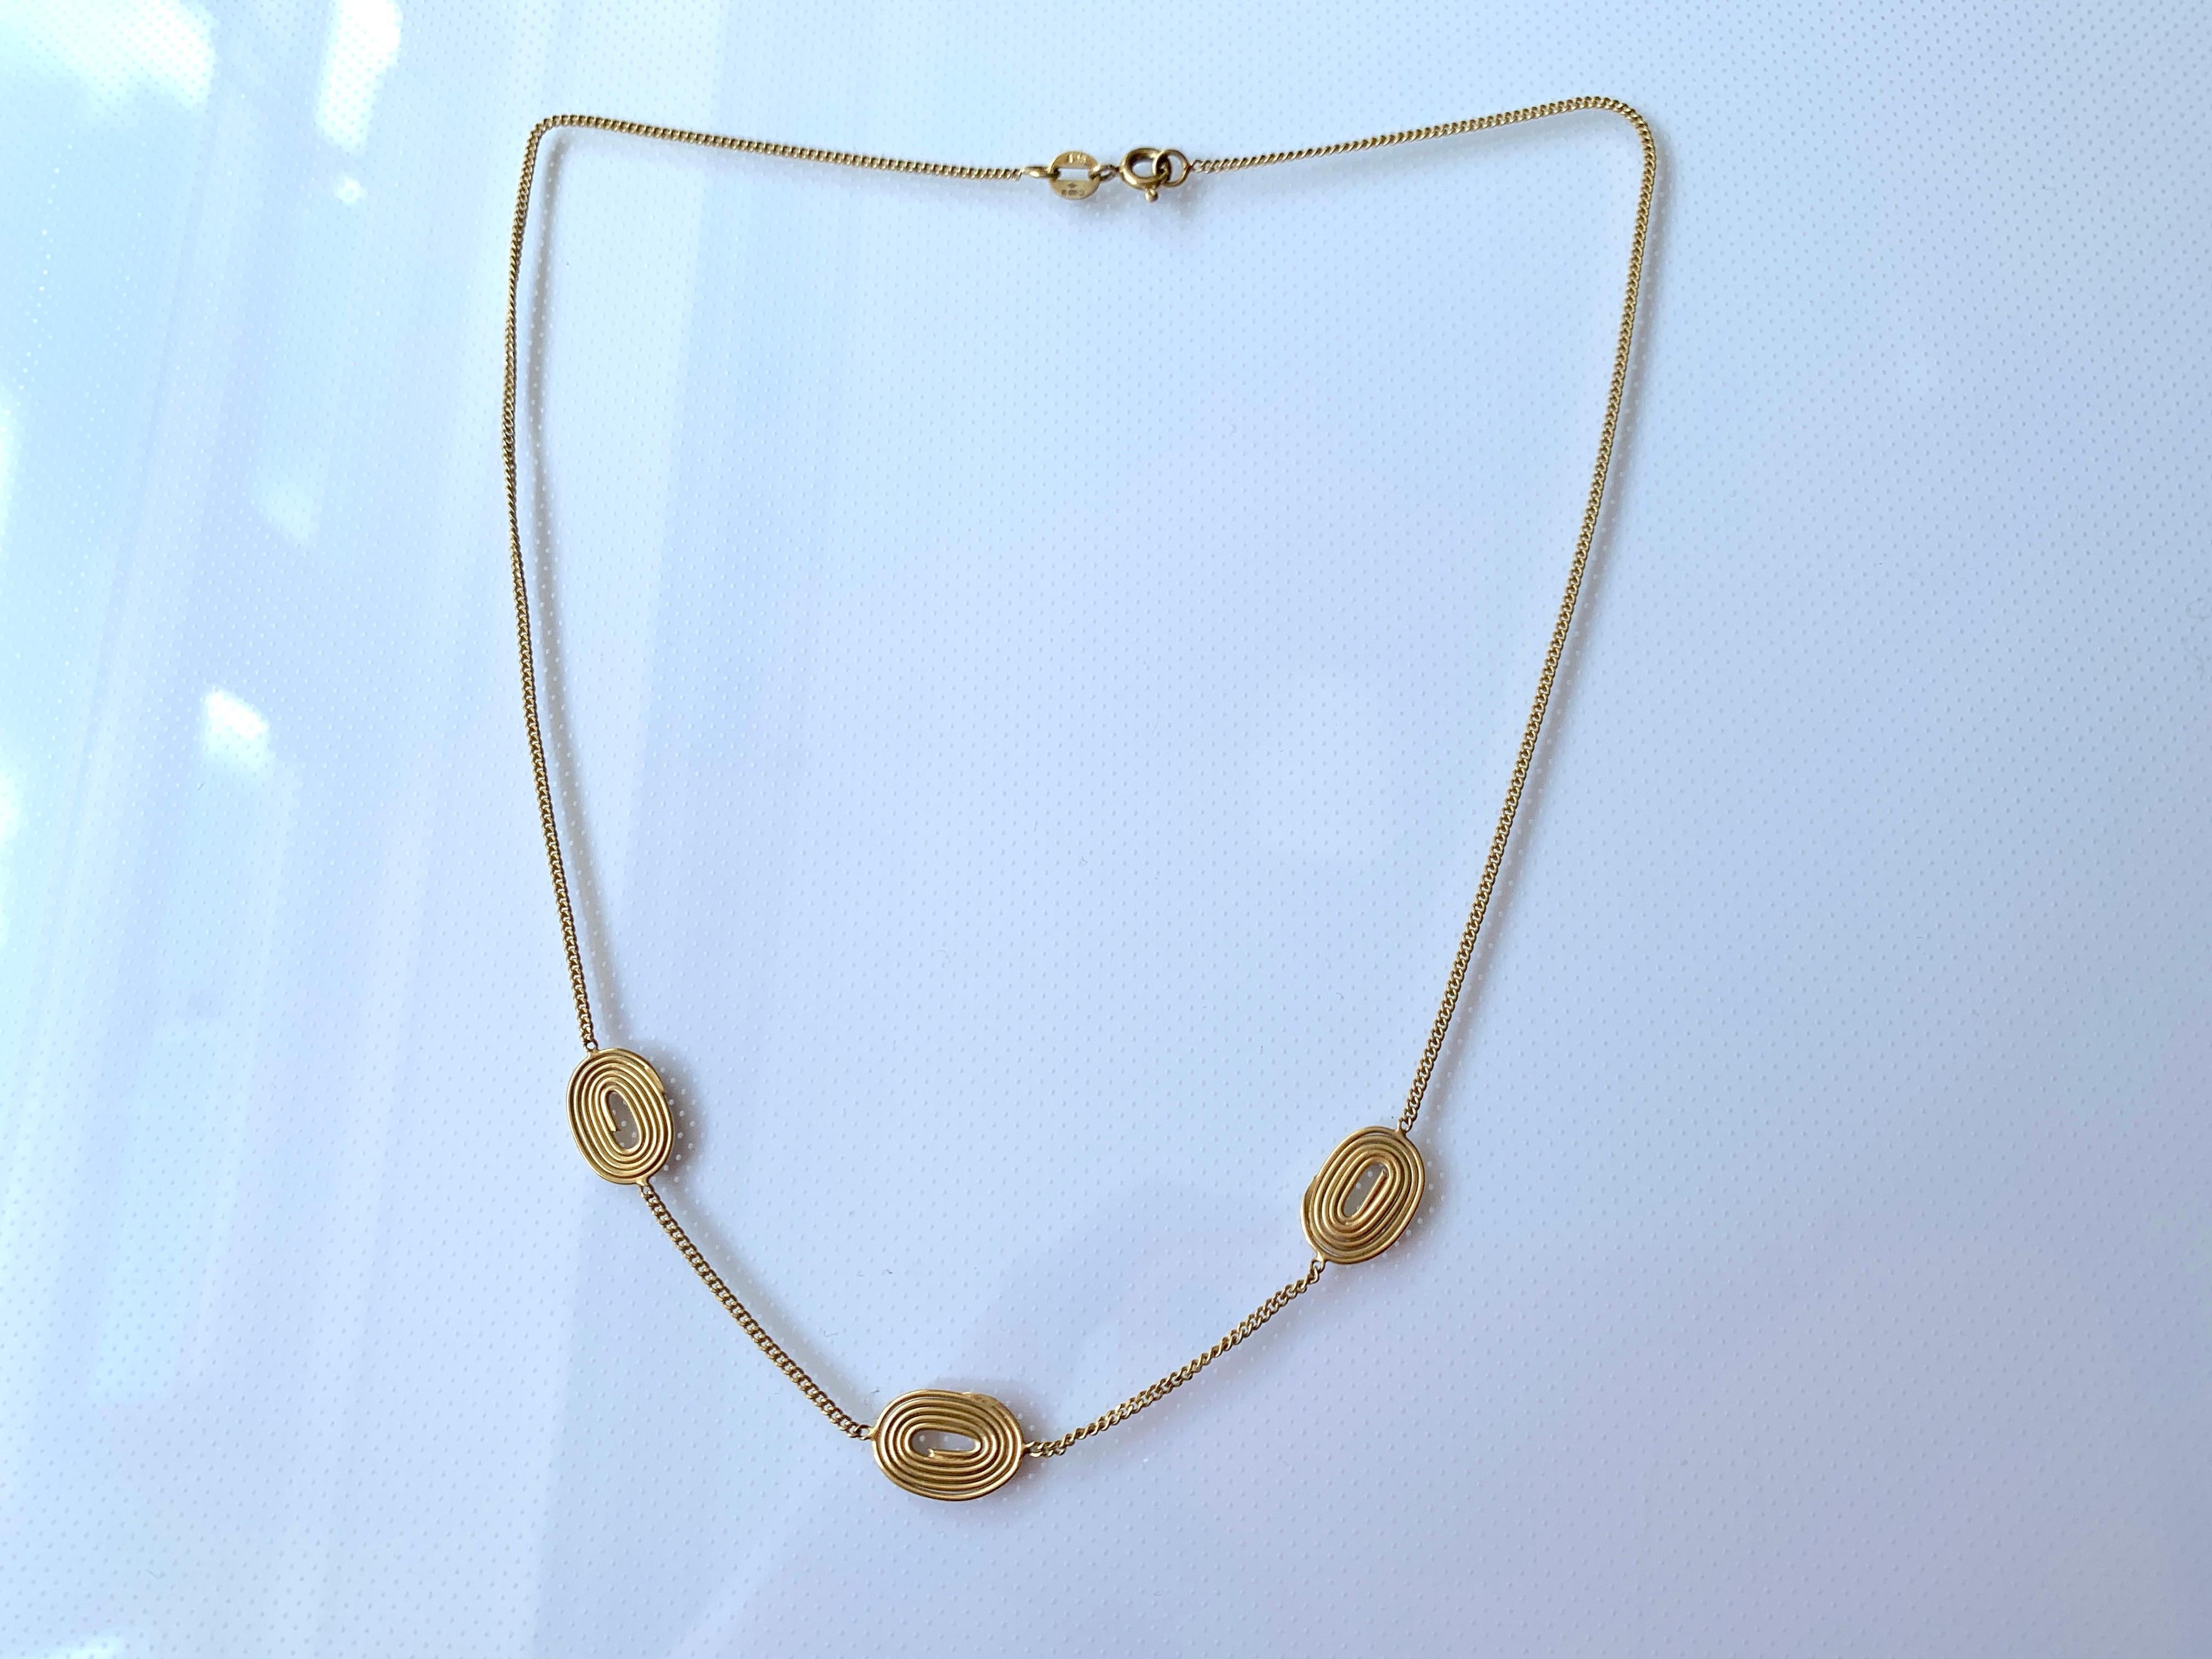 9ct 375 Gold Trio Circular wired spiral Choker
Vintage .
Excellent condition - Very Pretty with an African design influence
Fully Hallmarked by London Assay Offices
15.5 Inches in length.